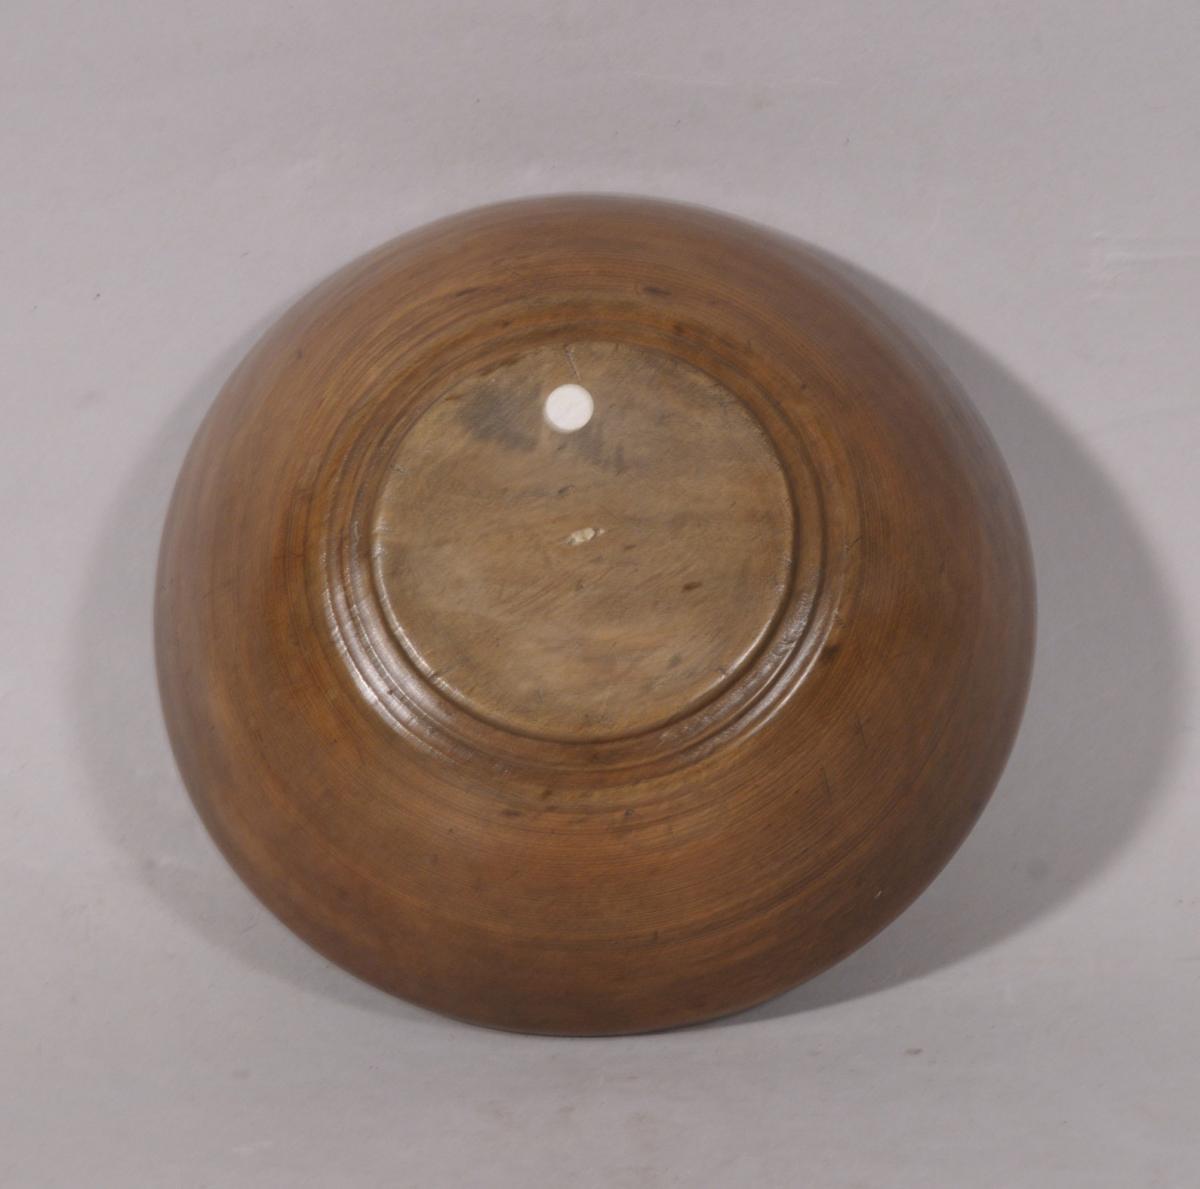 S/6012 Antique Treen Early 19th Century Sycamore Food Bowl